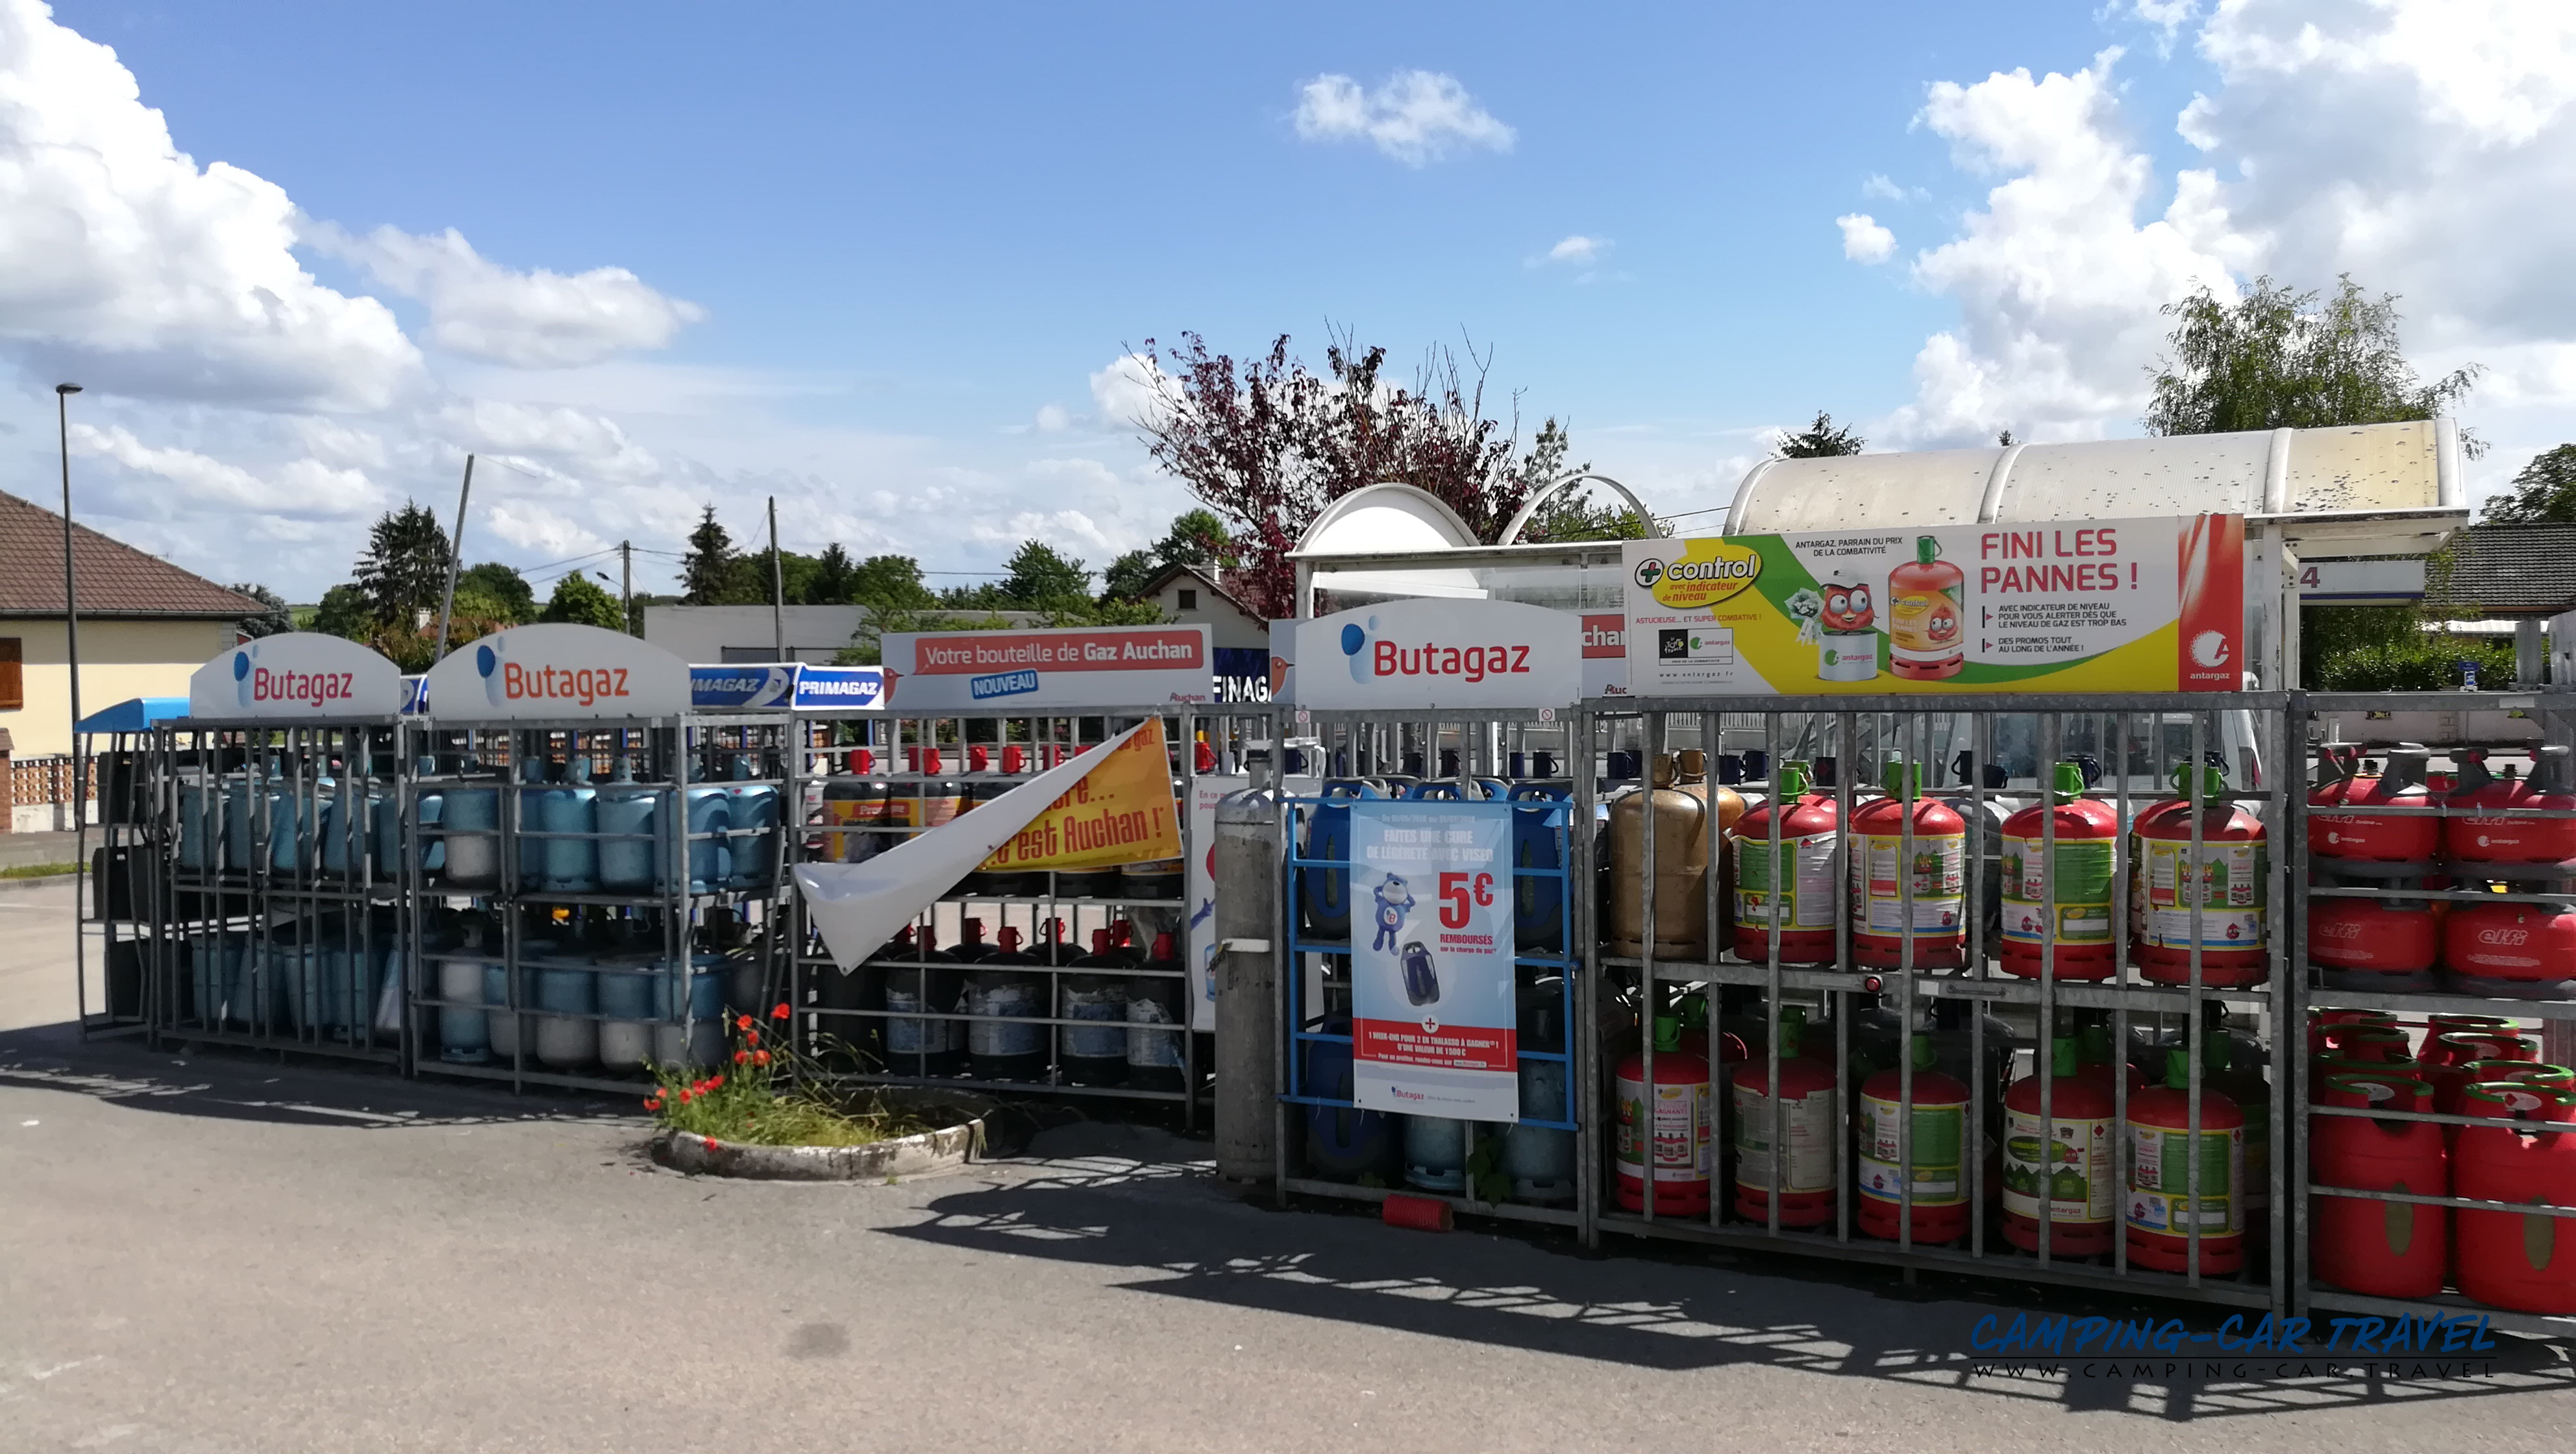 aire services camping car mailly le camp aube